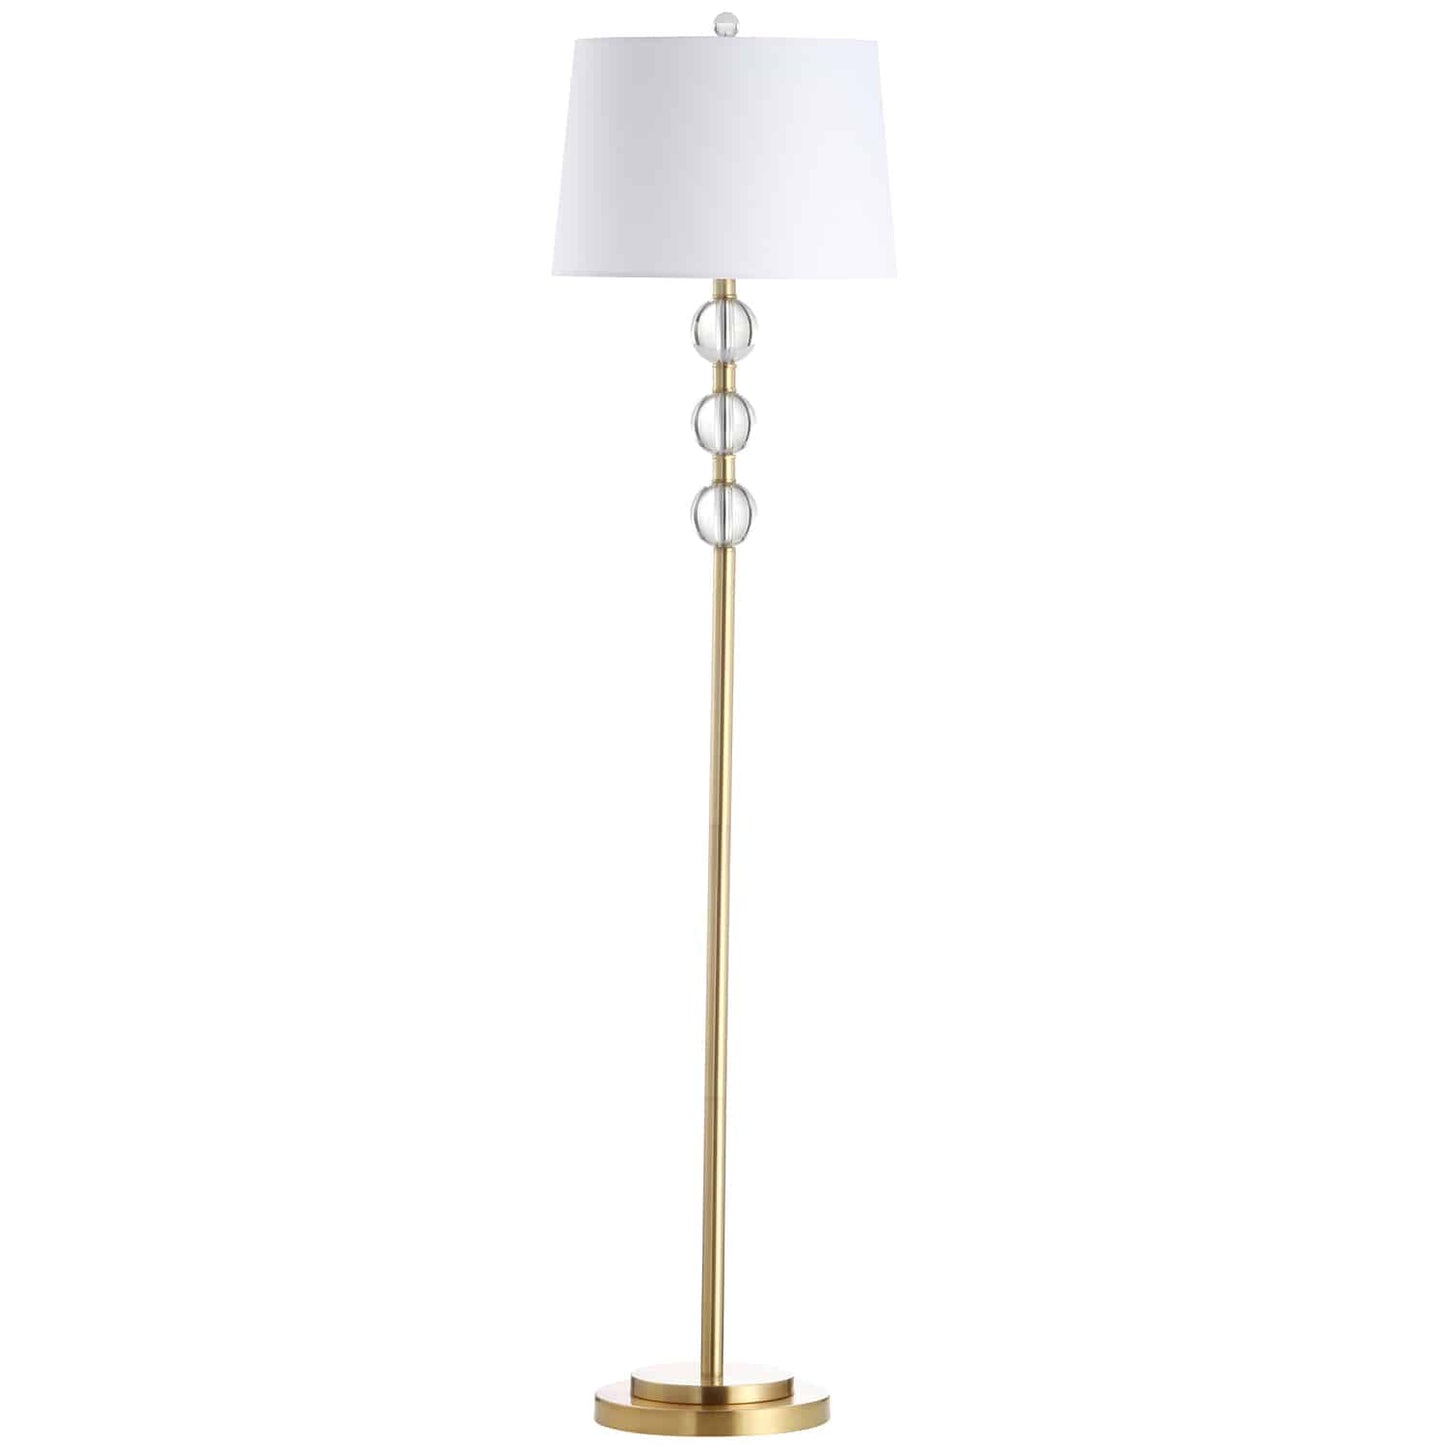 Dainolite C182F-AGB 1 Light Incandescent Crystal Floor Lamp, Aged Brass with White Shade